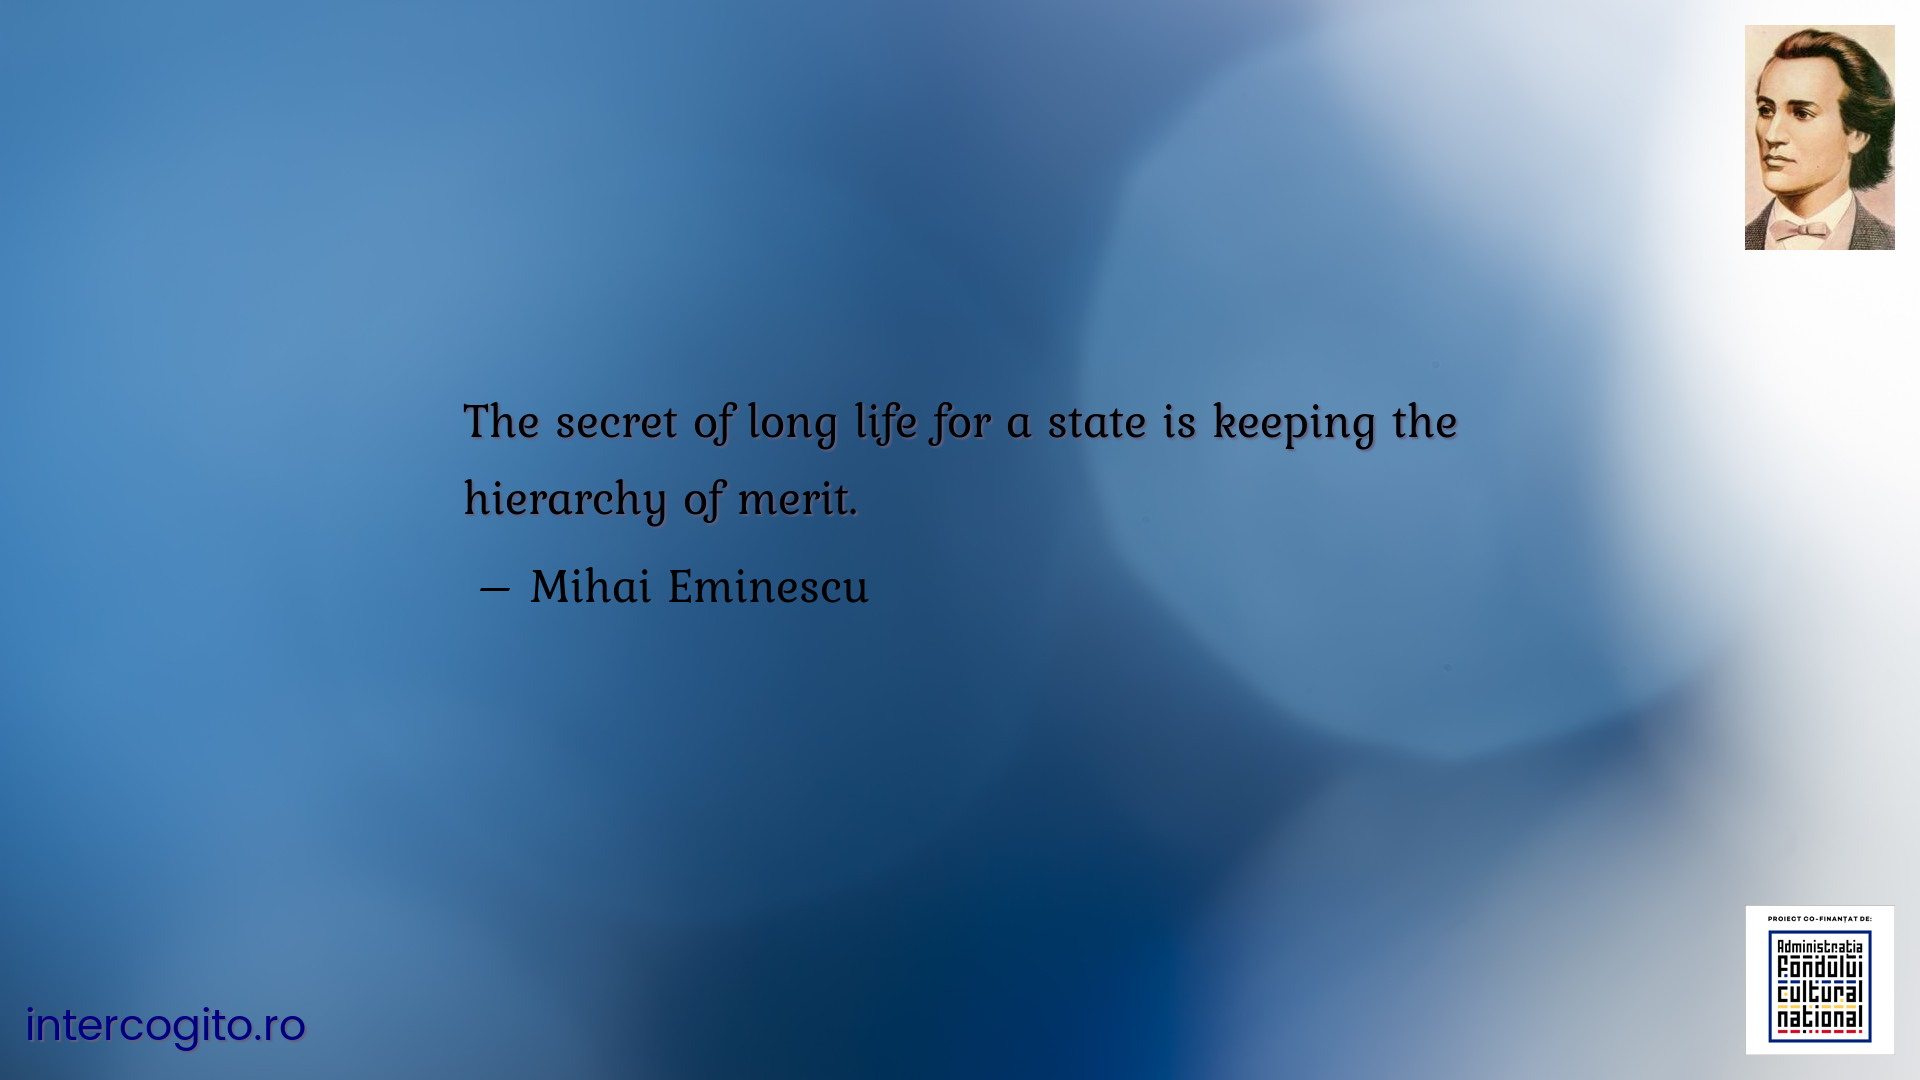 The secret of long life for a state is keeping the hierarchy of merit.